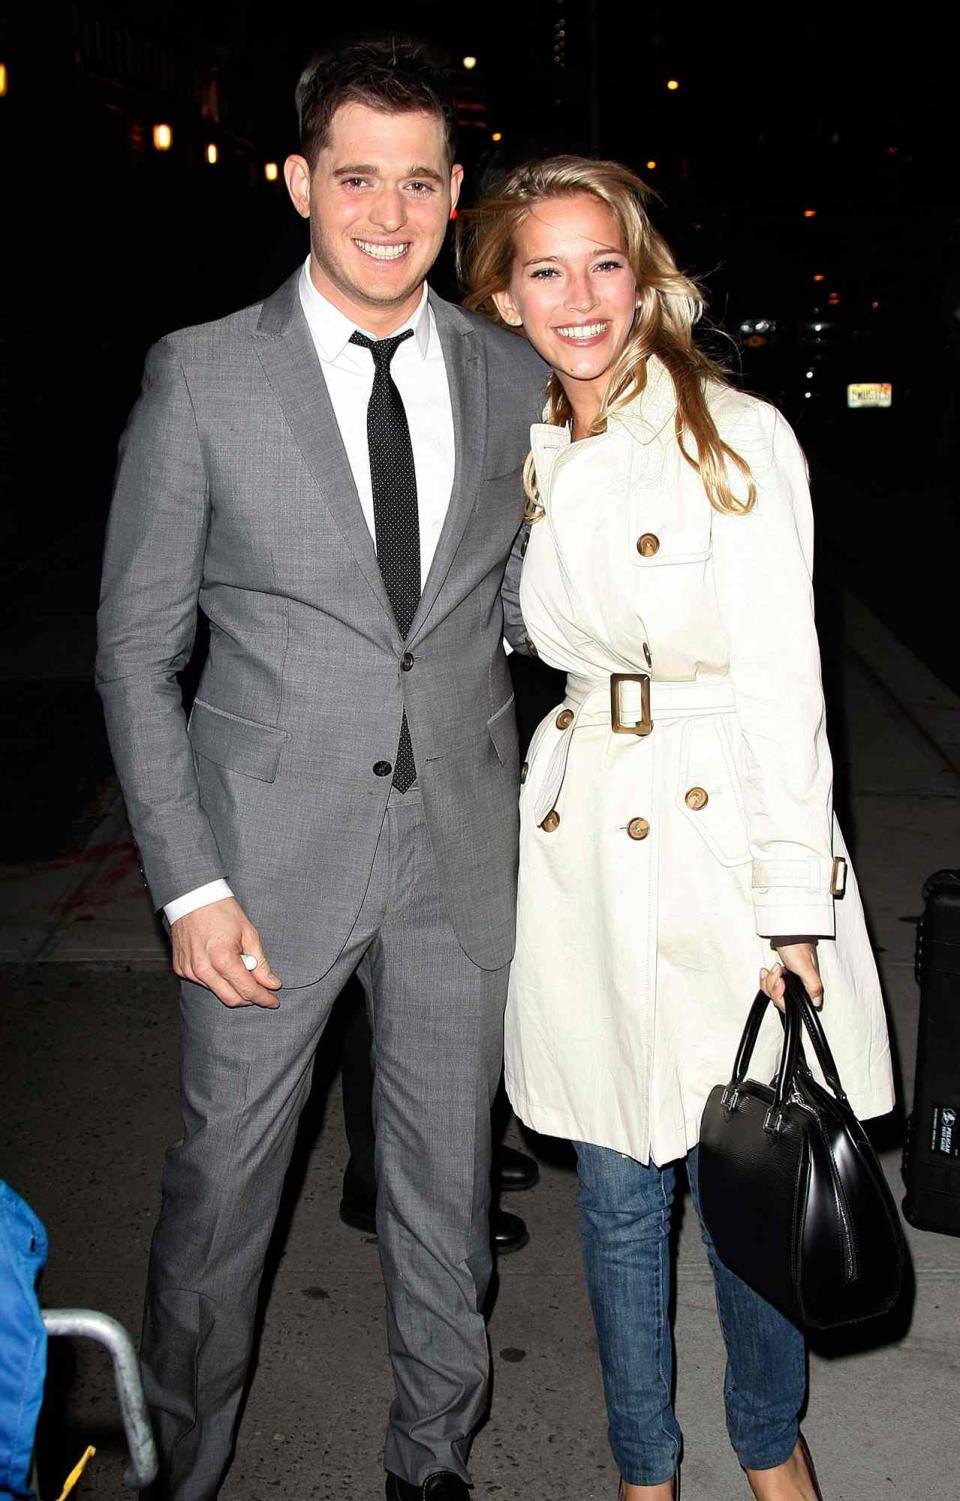 Michael Buble (L) and his girlfriend actress Luisana Lopilato visit "Late Show With David Letterman" at the Ed Sullivan Theater on November 3, 2009 in New York City